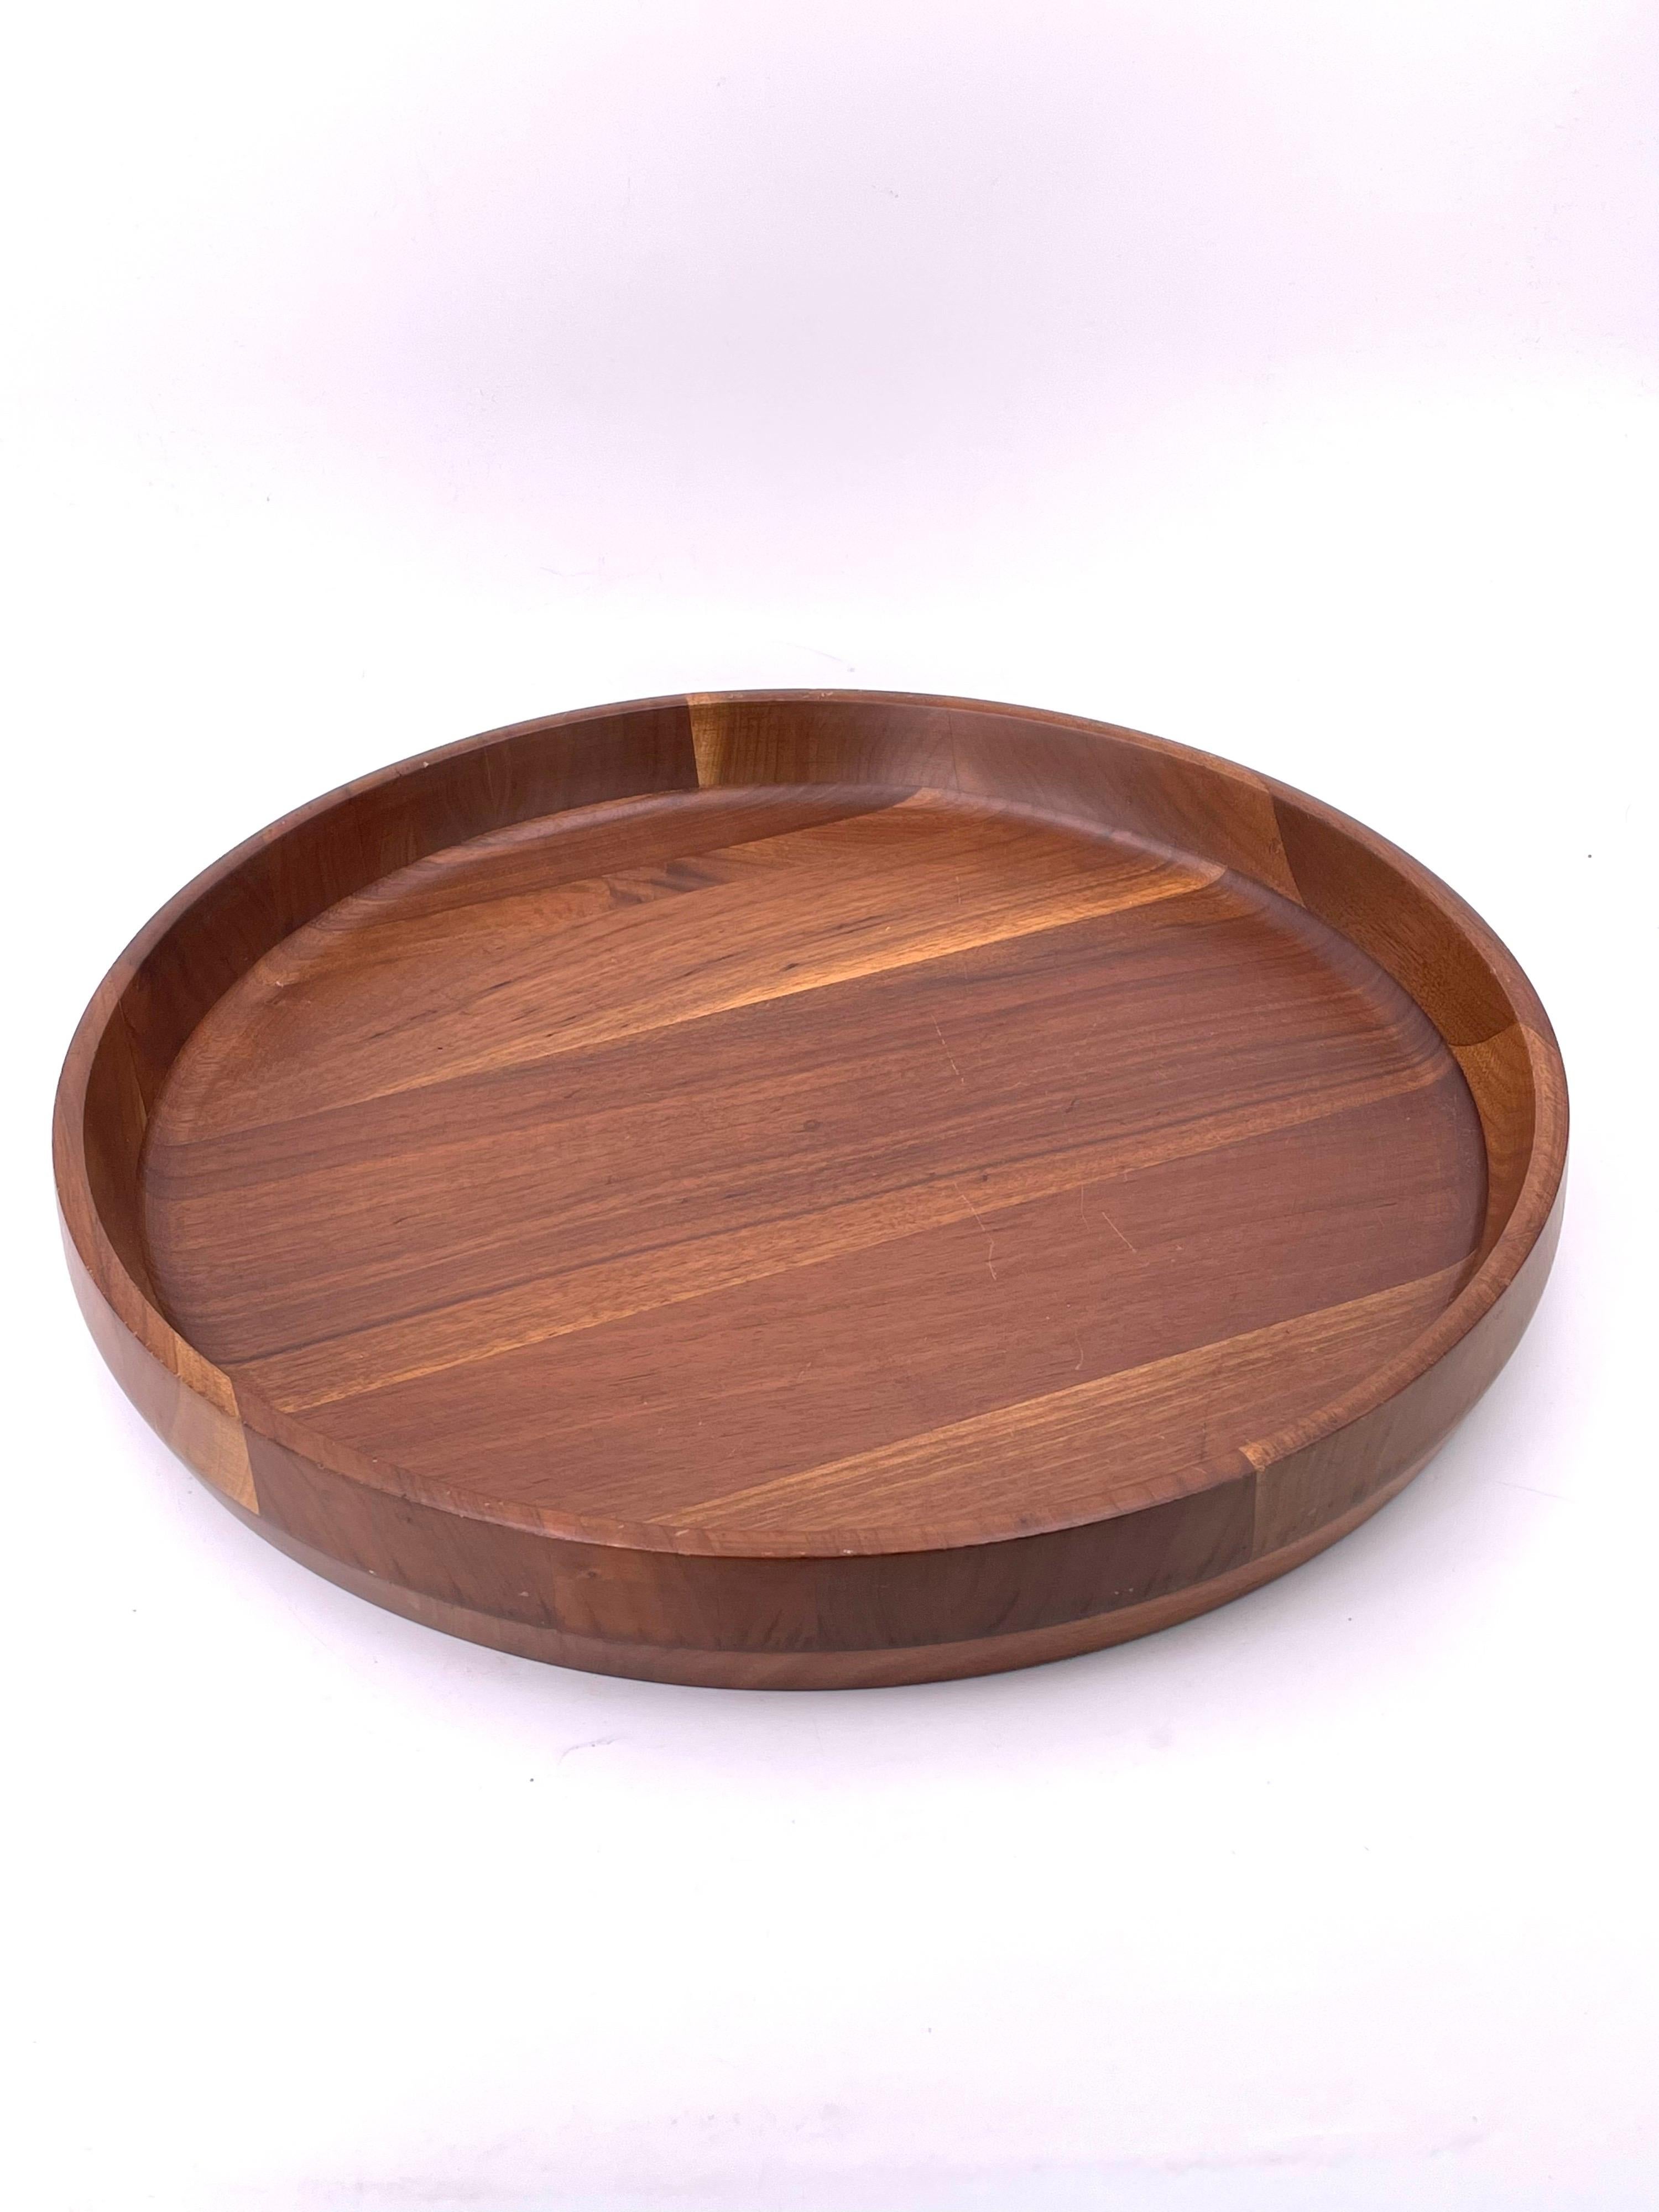 Beautiful solid walnut slanted round tray, with a raised edge by Kustom Kraft great condition, circa 1950's.